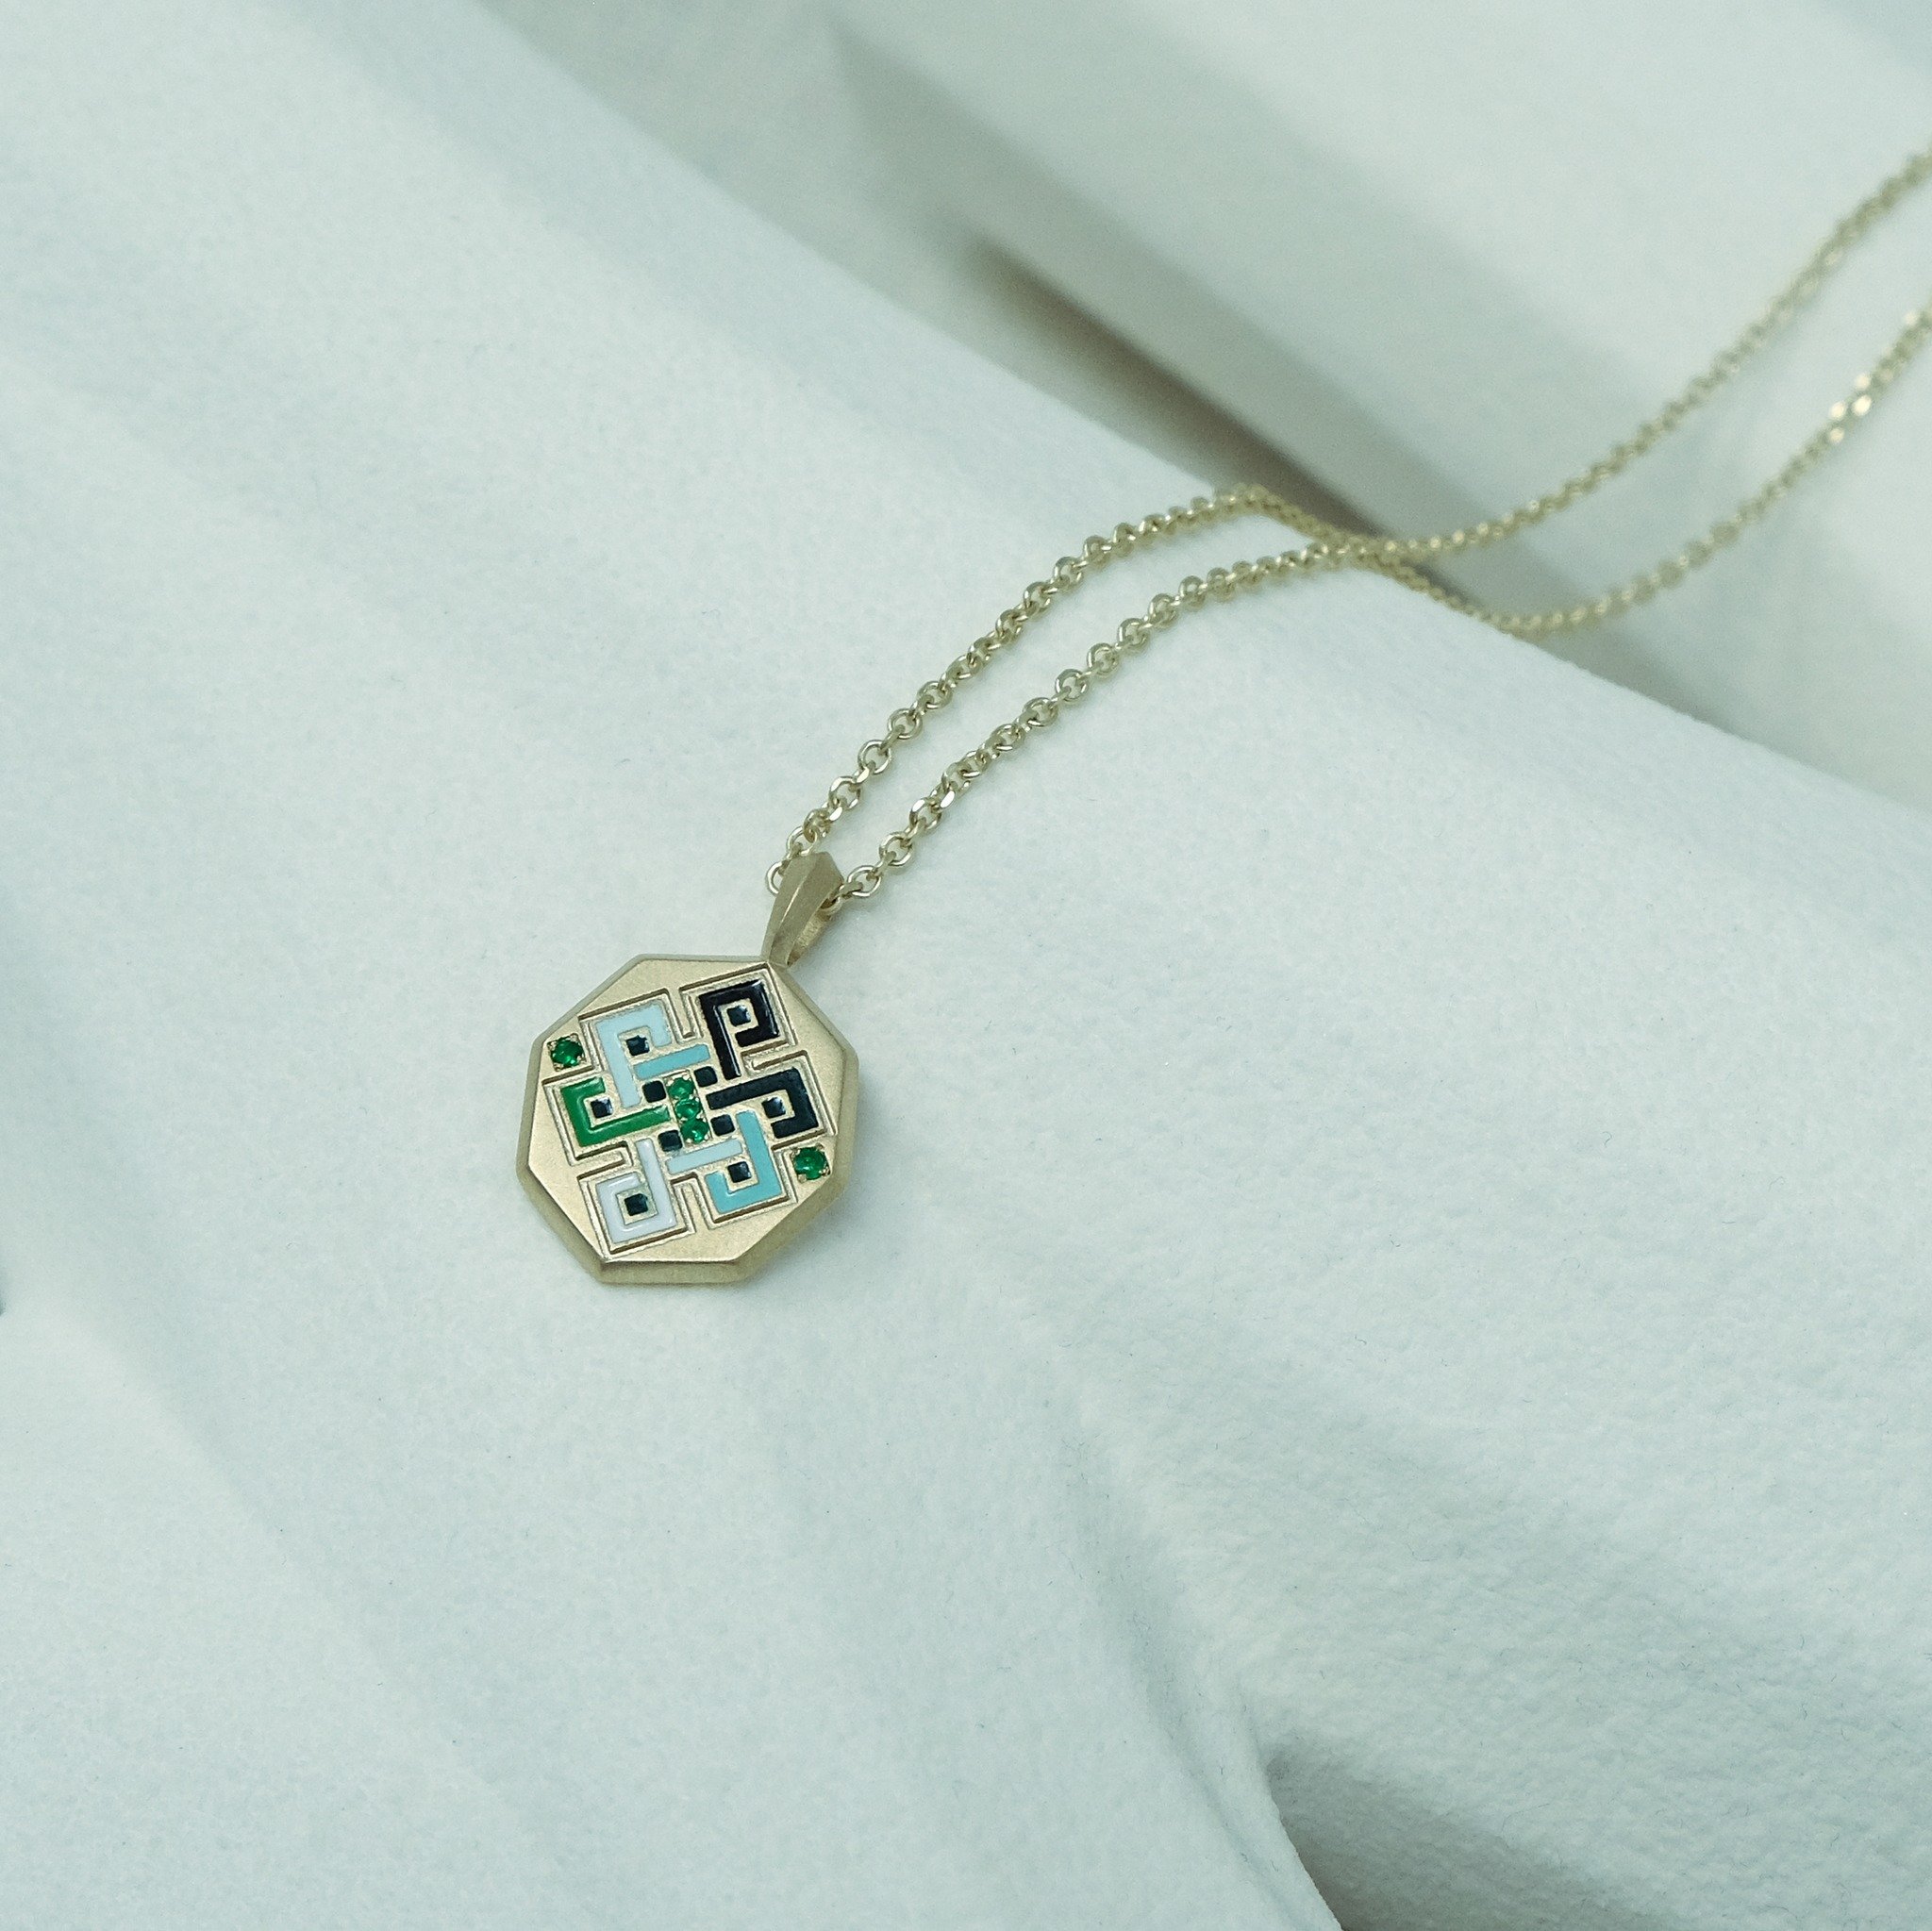 A faceted hexagon beauty in matte finished yellow gold with multi-colour enamel with round brilliant-cut Indian emeralds.
.
The pendant features an endless knot pattern, symbolising wisdom and compassion. It is one of the eight auspicious symbols, an